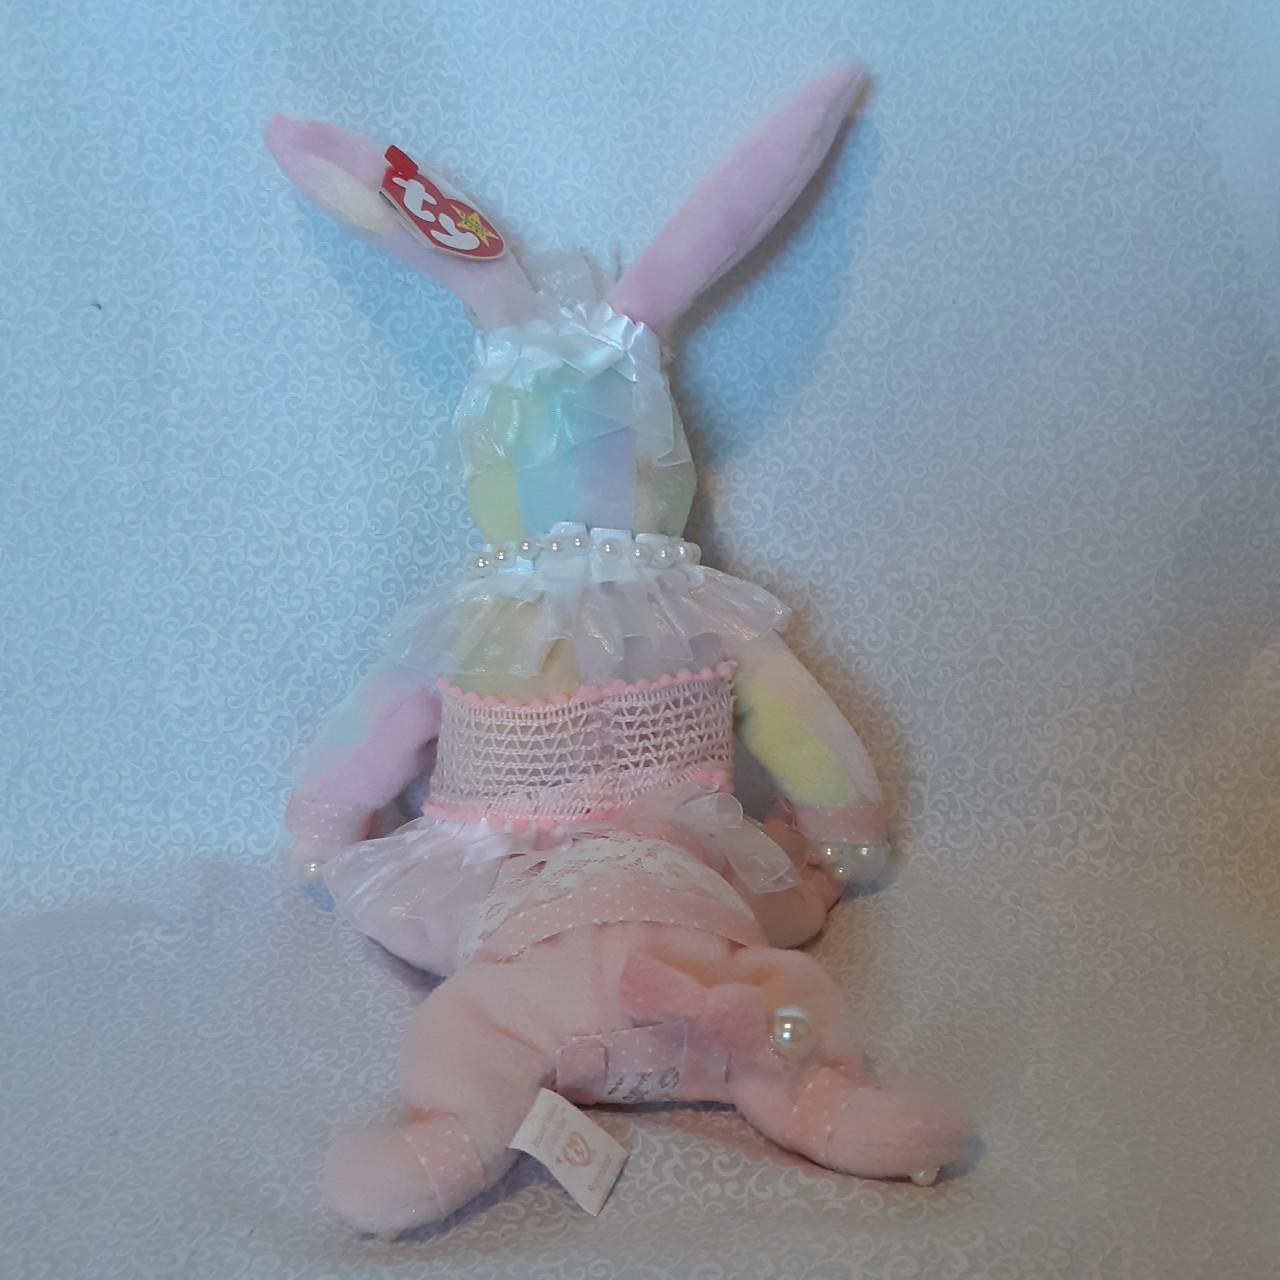 Product Image 4 - Pinky patty!!
RESERVED!!!

Pinky Patty is attending